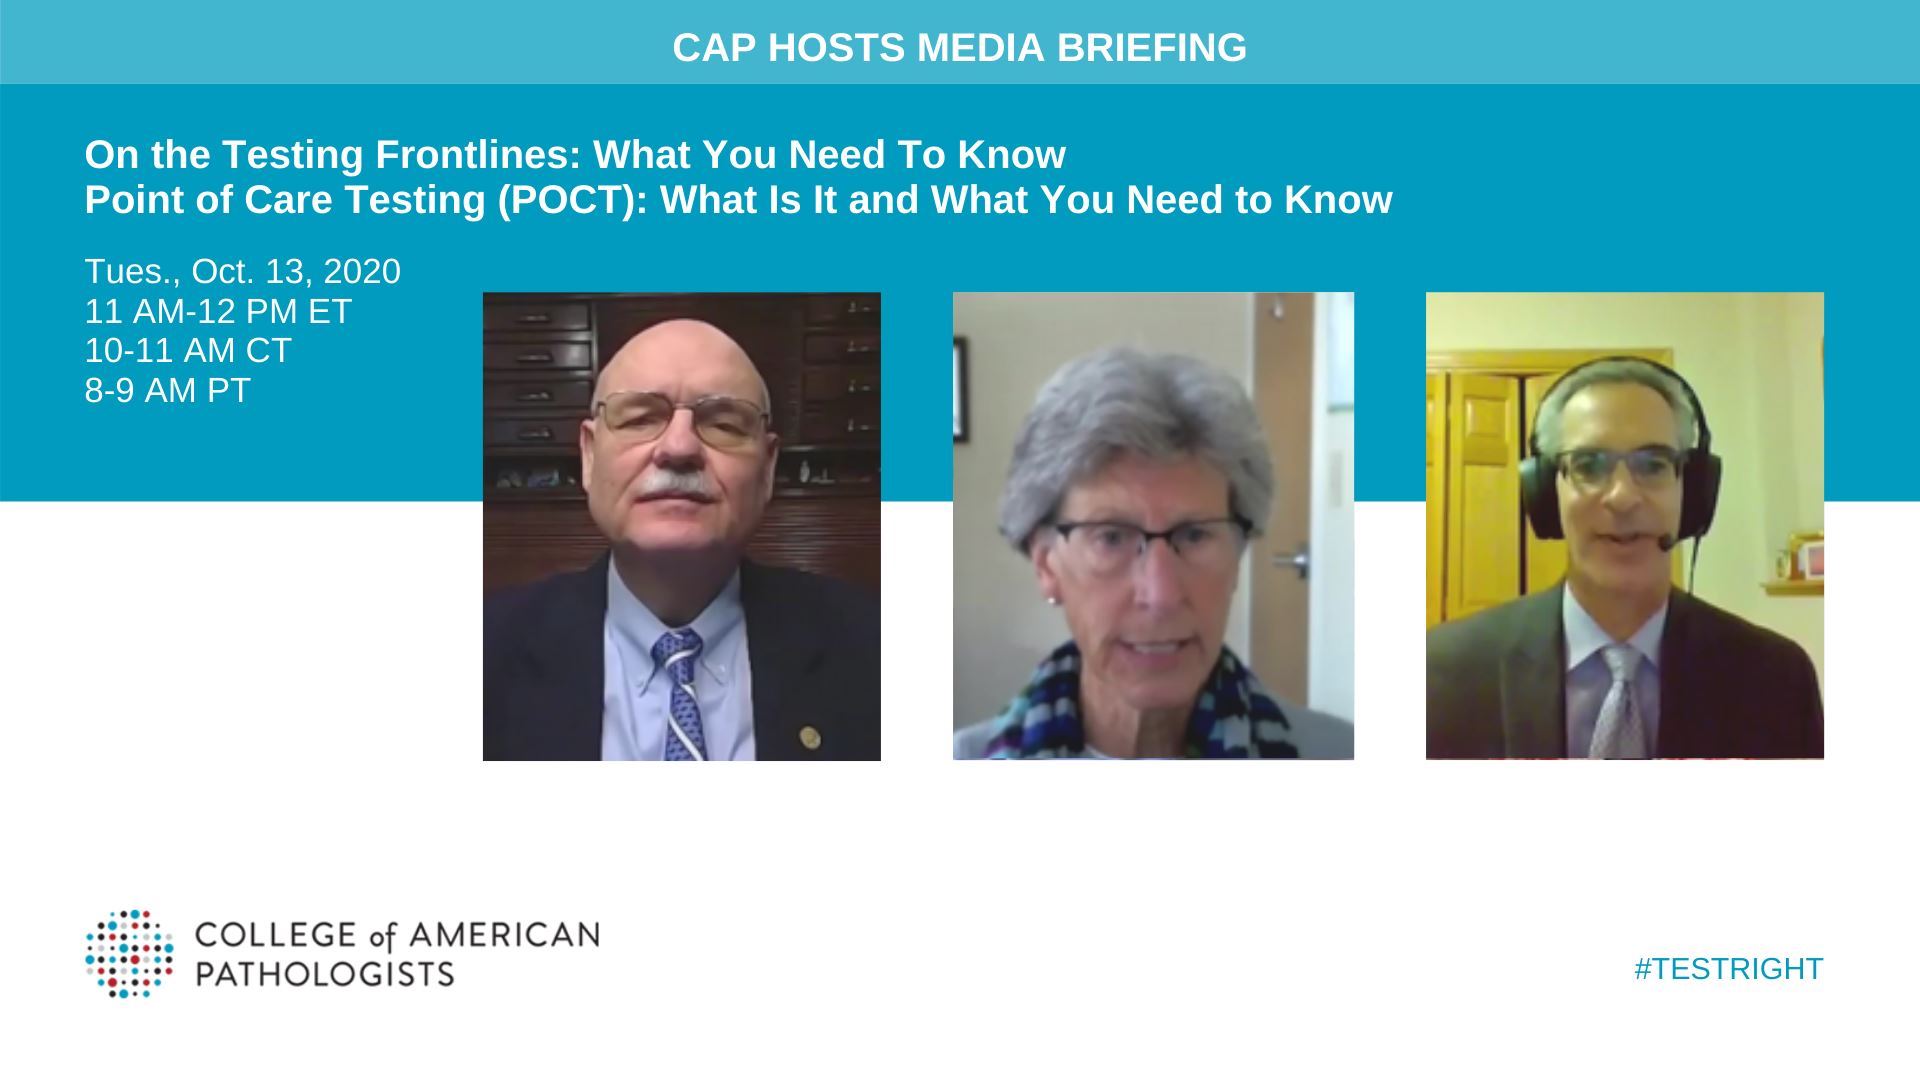 CAP20 Media Briefing on Point of Care Testing: What is it? What you need to know and current challenges and benefits